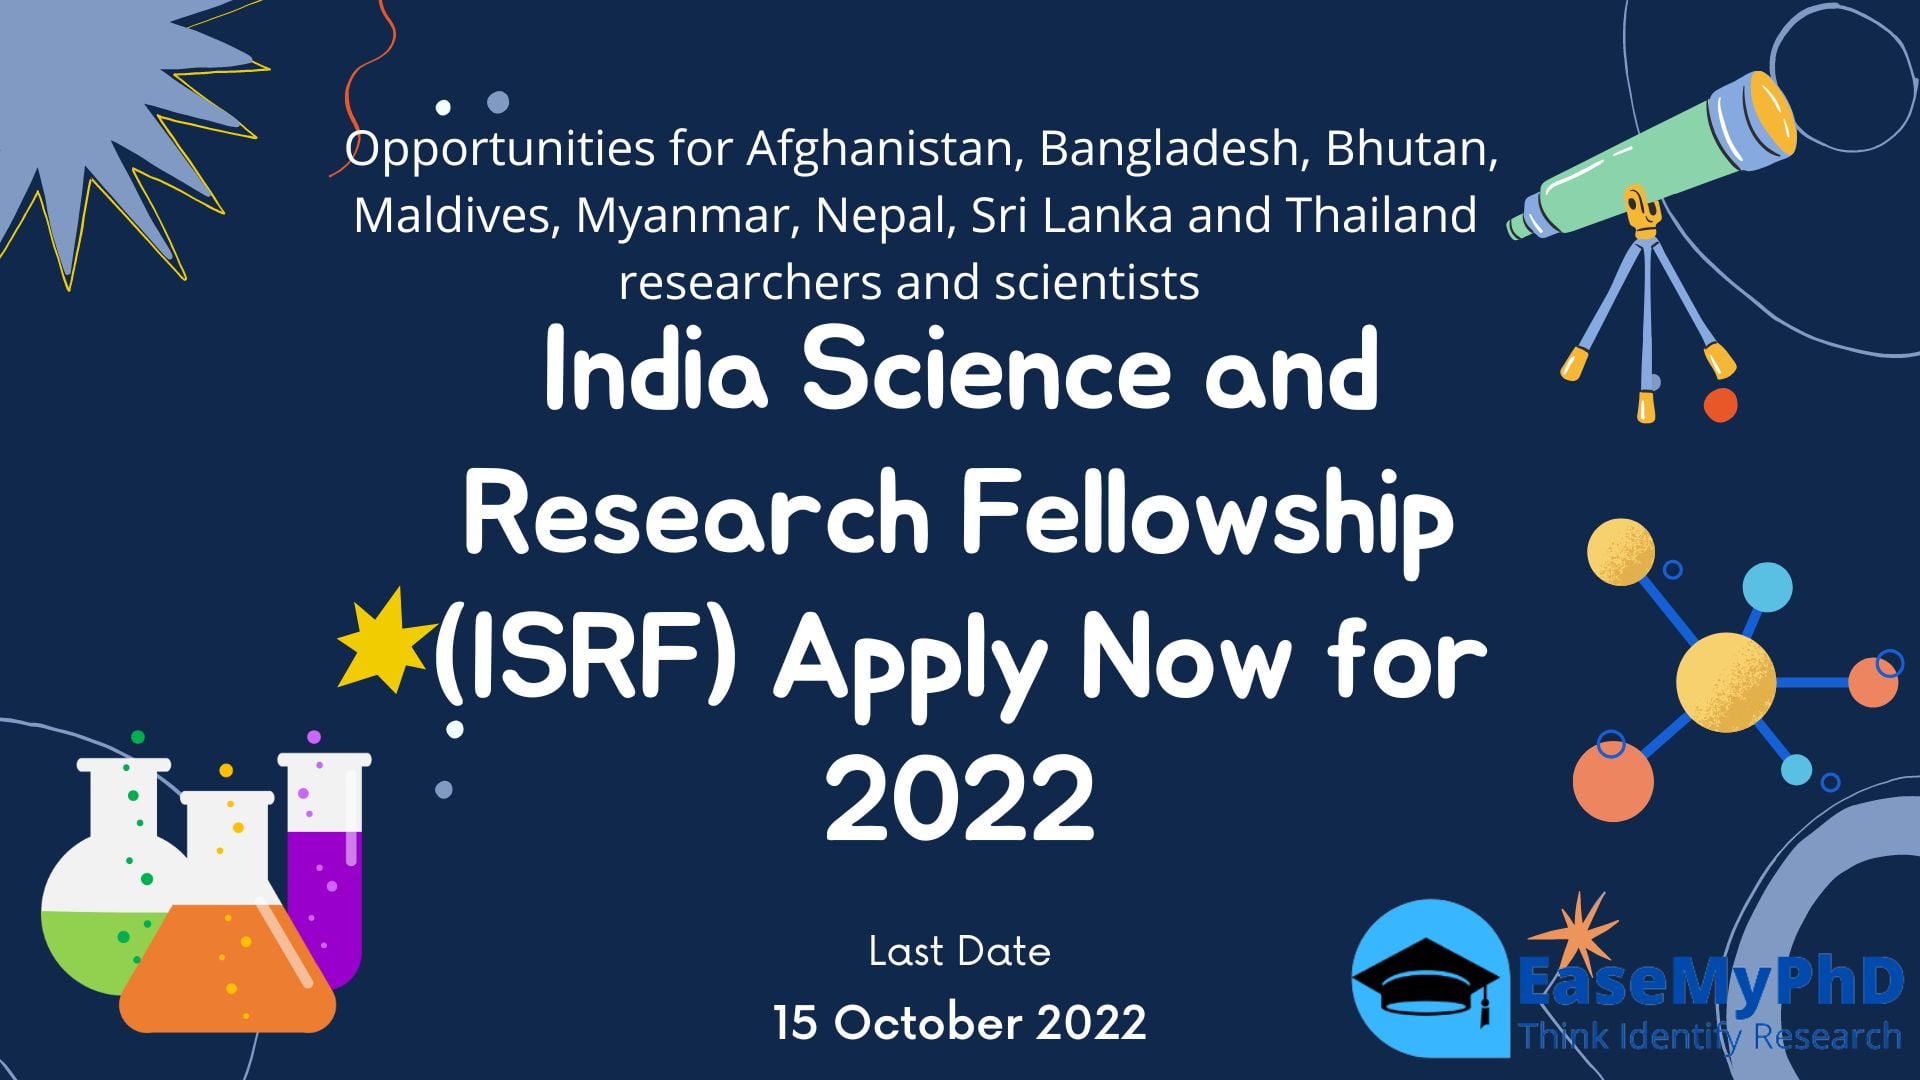 India Science and Research Fellowship (ISRF) Apply Now for 2022-23